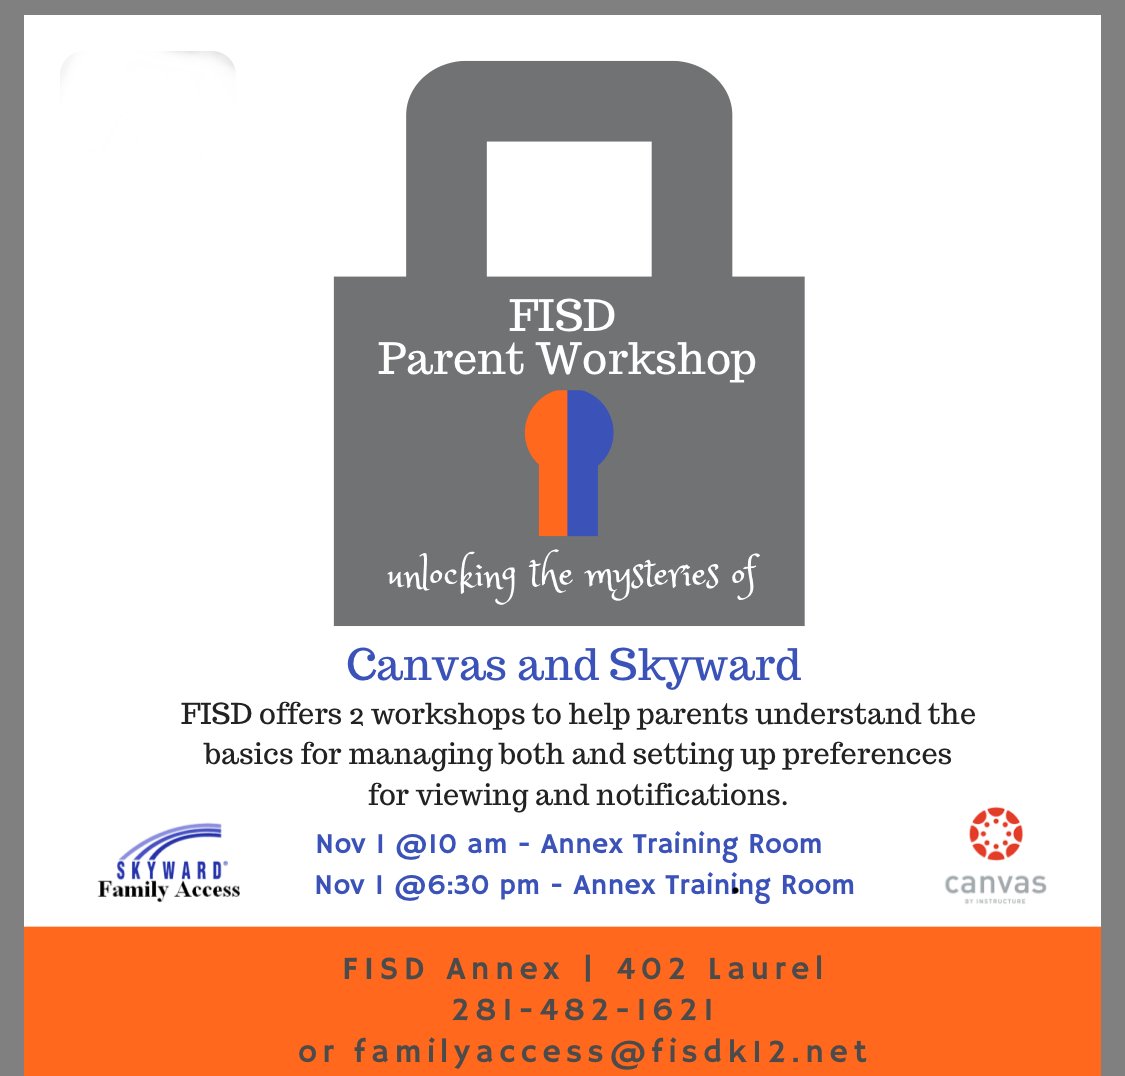 Friendswood Isd On Twitter Want To Be Notified If Your Child S Grade Falls Below An 80 Come To Our Parent Workshop On Skyward And Canvas Nov 1st Https T Co Kd5d7cupjq